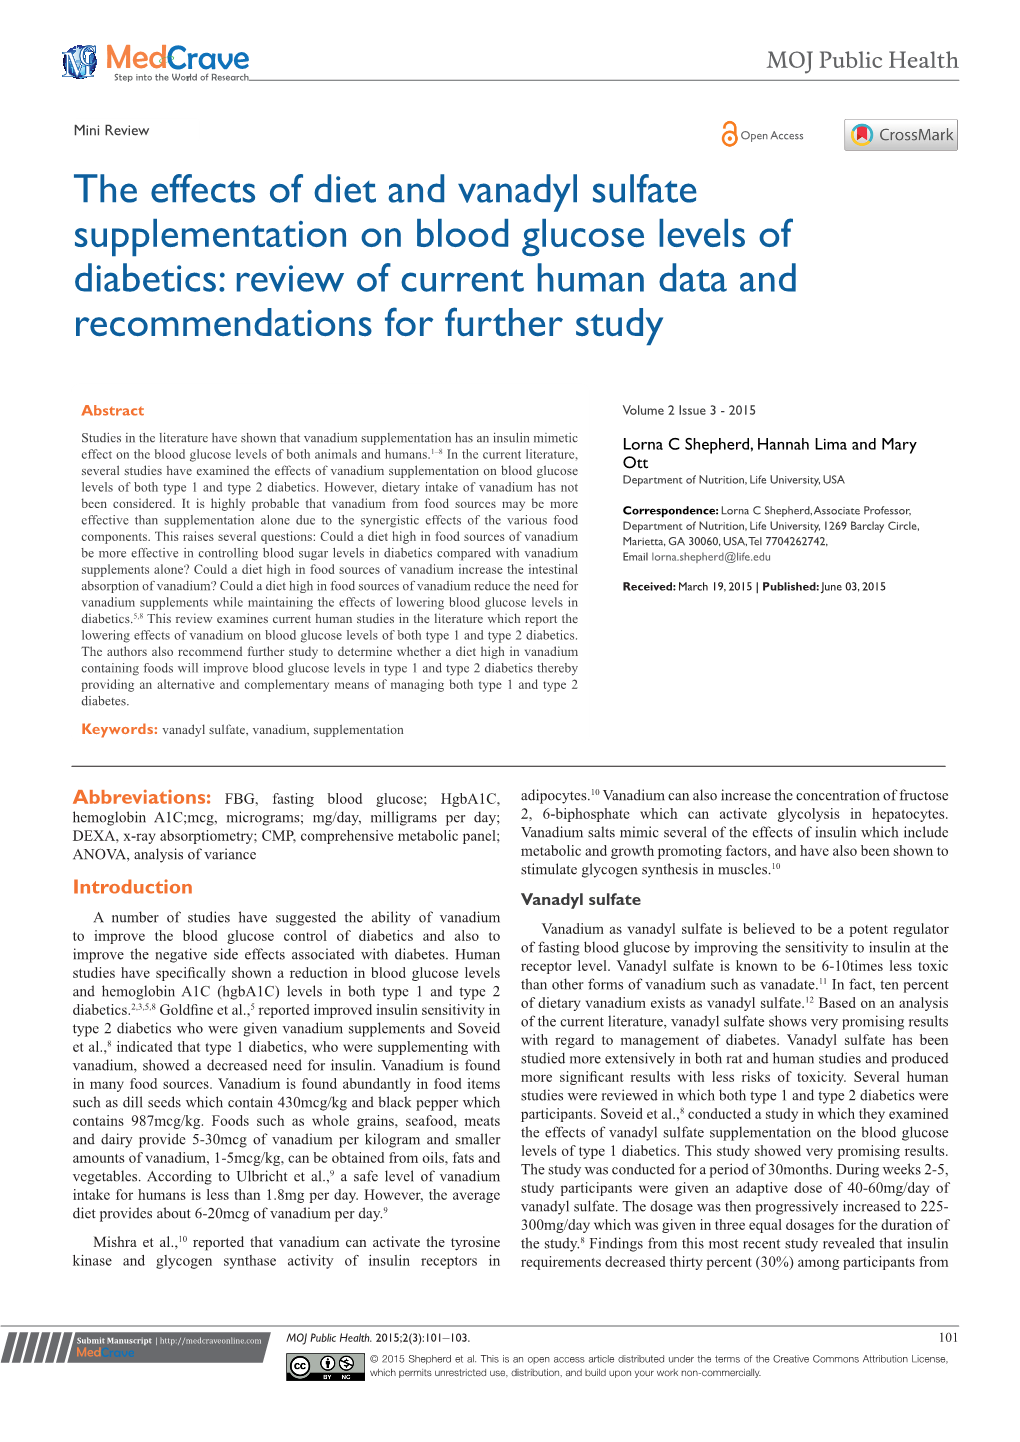 The Effects of Diet and Vanadyl Sulfate Supplementation on Blood Glucose Levels of Diabetics: Review of Current Human Data and Recommendations for Further Study